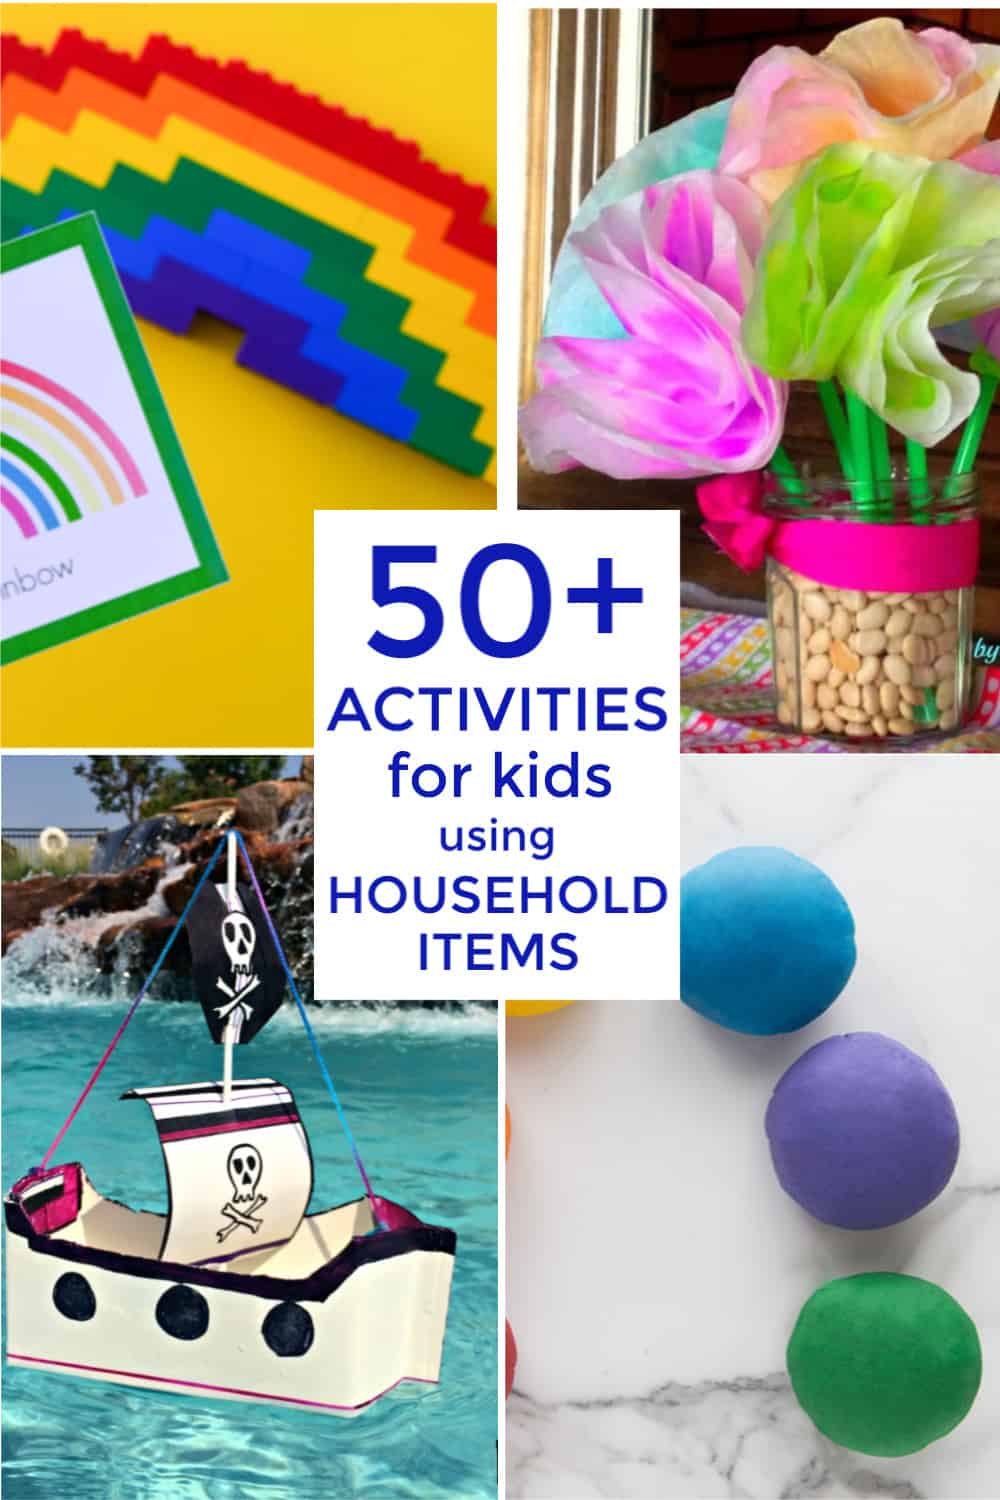 50+ Activities for Kids using Common Household Items